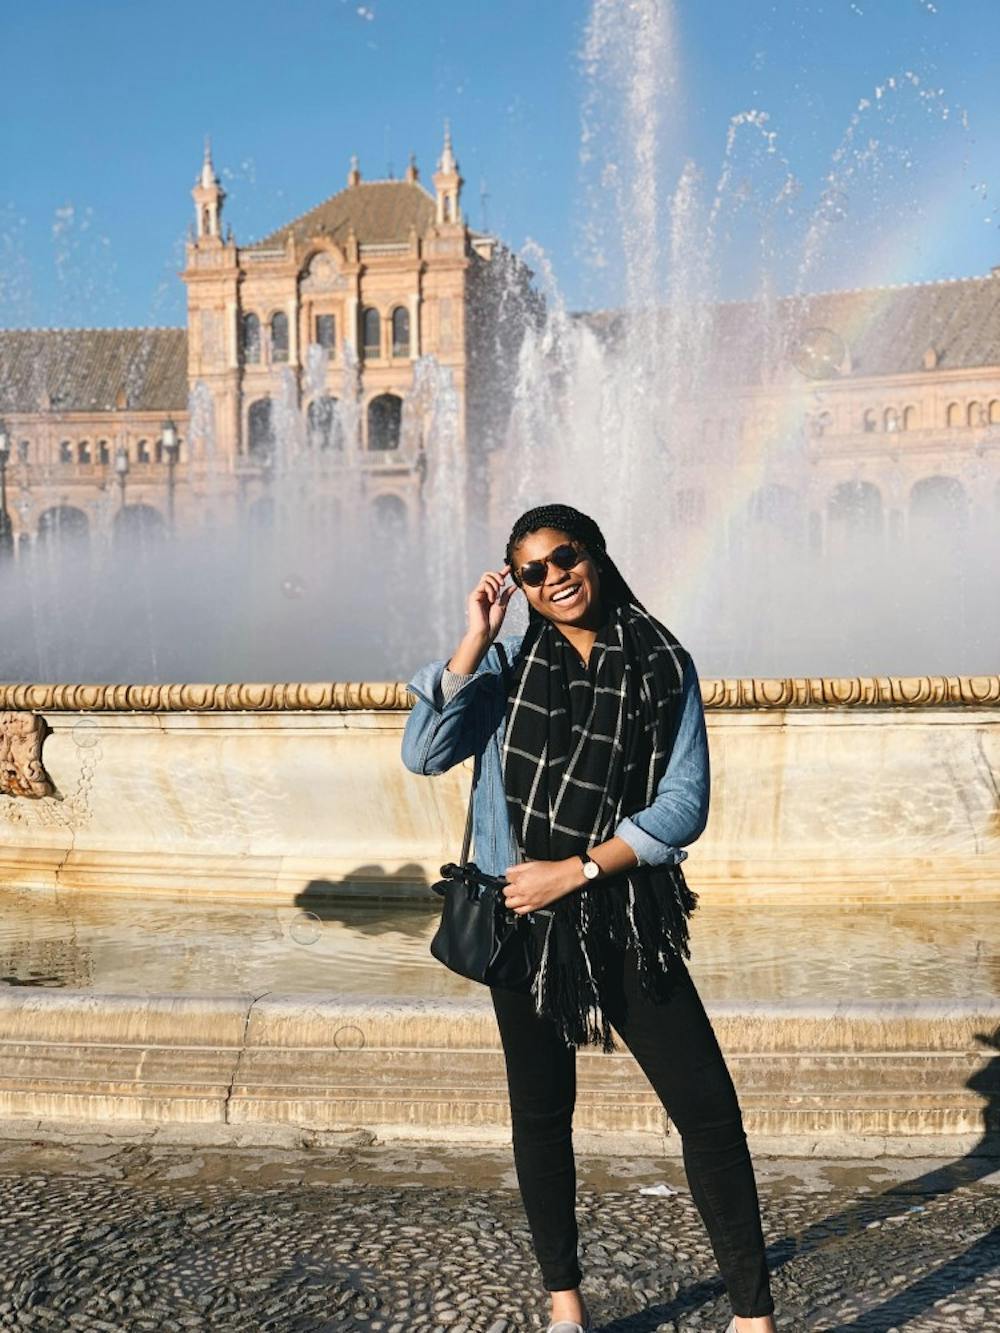 Sophomore Morehead-Cain Scholar Ruth Samuel poses in front of the Plaza de España. "Here’s me on my second day in Spain in front of the Plaza de España in Sevilla, where Game of Thrones (and I think Star Wars) has been filmed!"